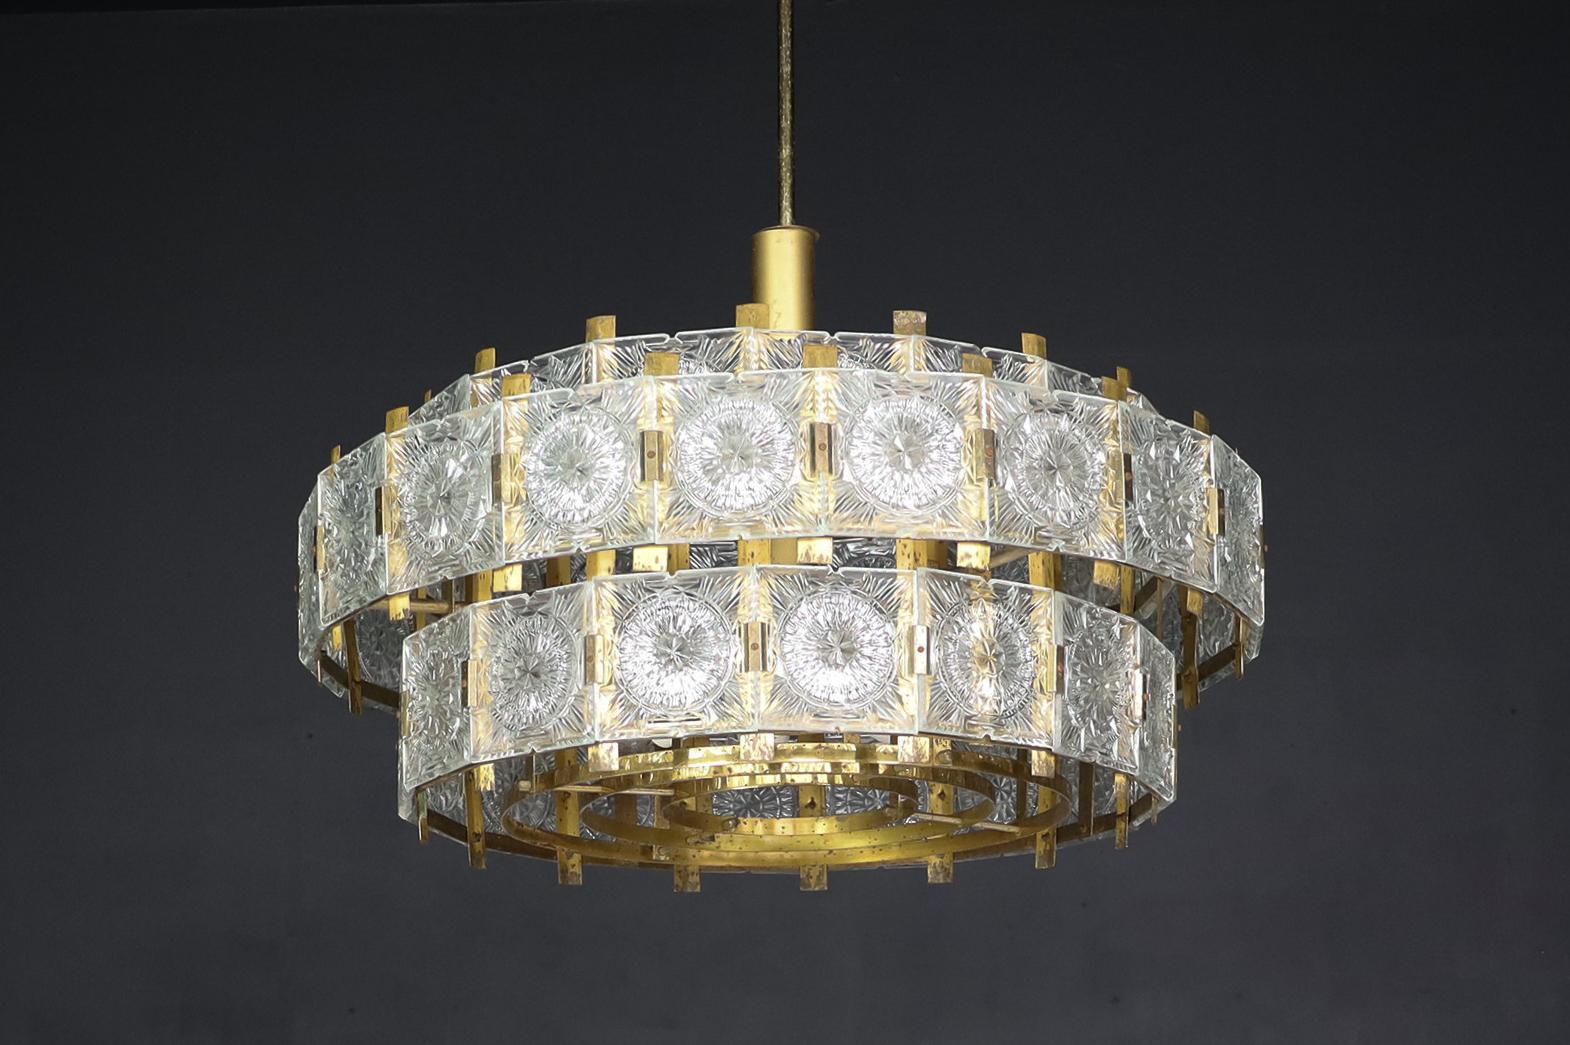 Large extravagant chandelier with patinated brass fixture, Praque 1960s

Large luxurious chandelier with patinated brass fixture and thick decorative cut crystal glass elements produced and designed in Czechia in the 1960s. This chandelier with a